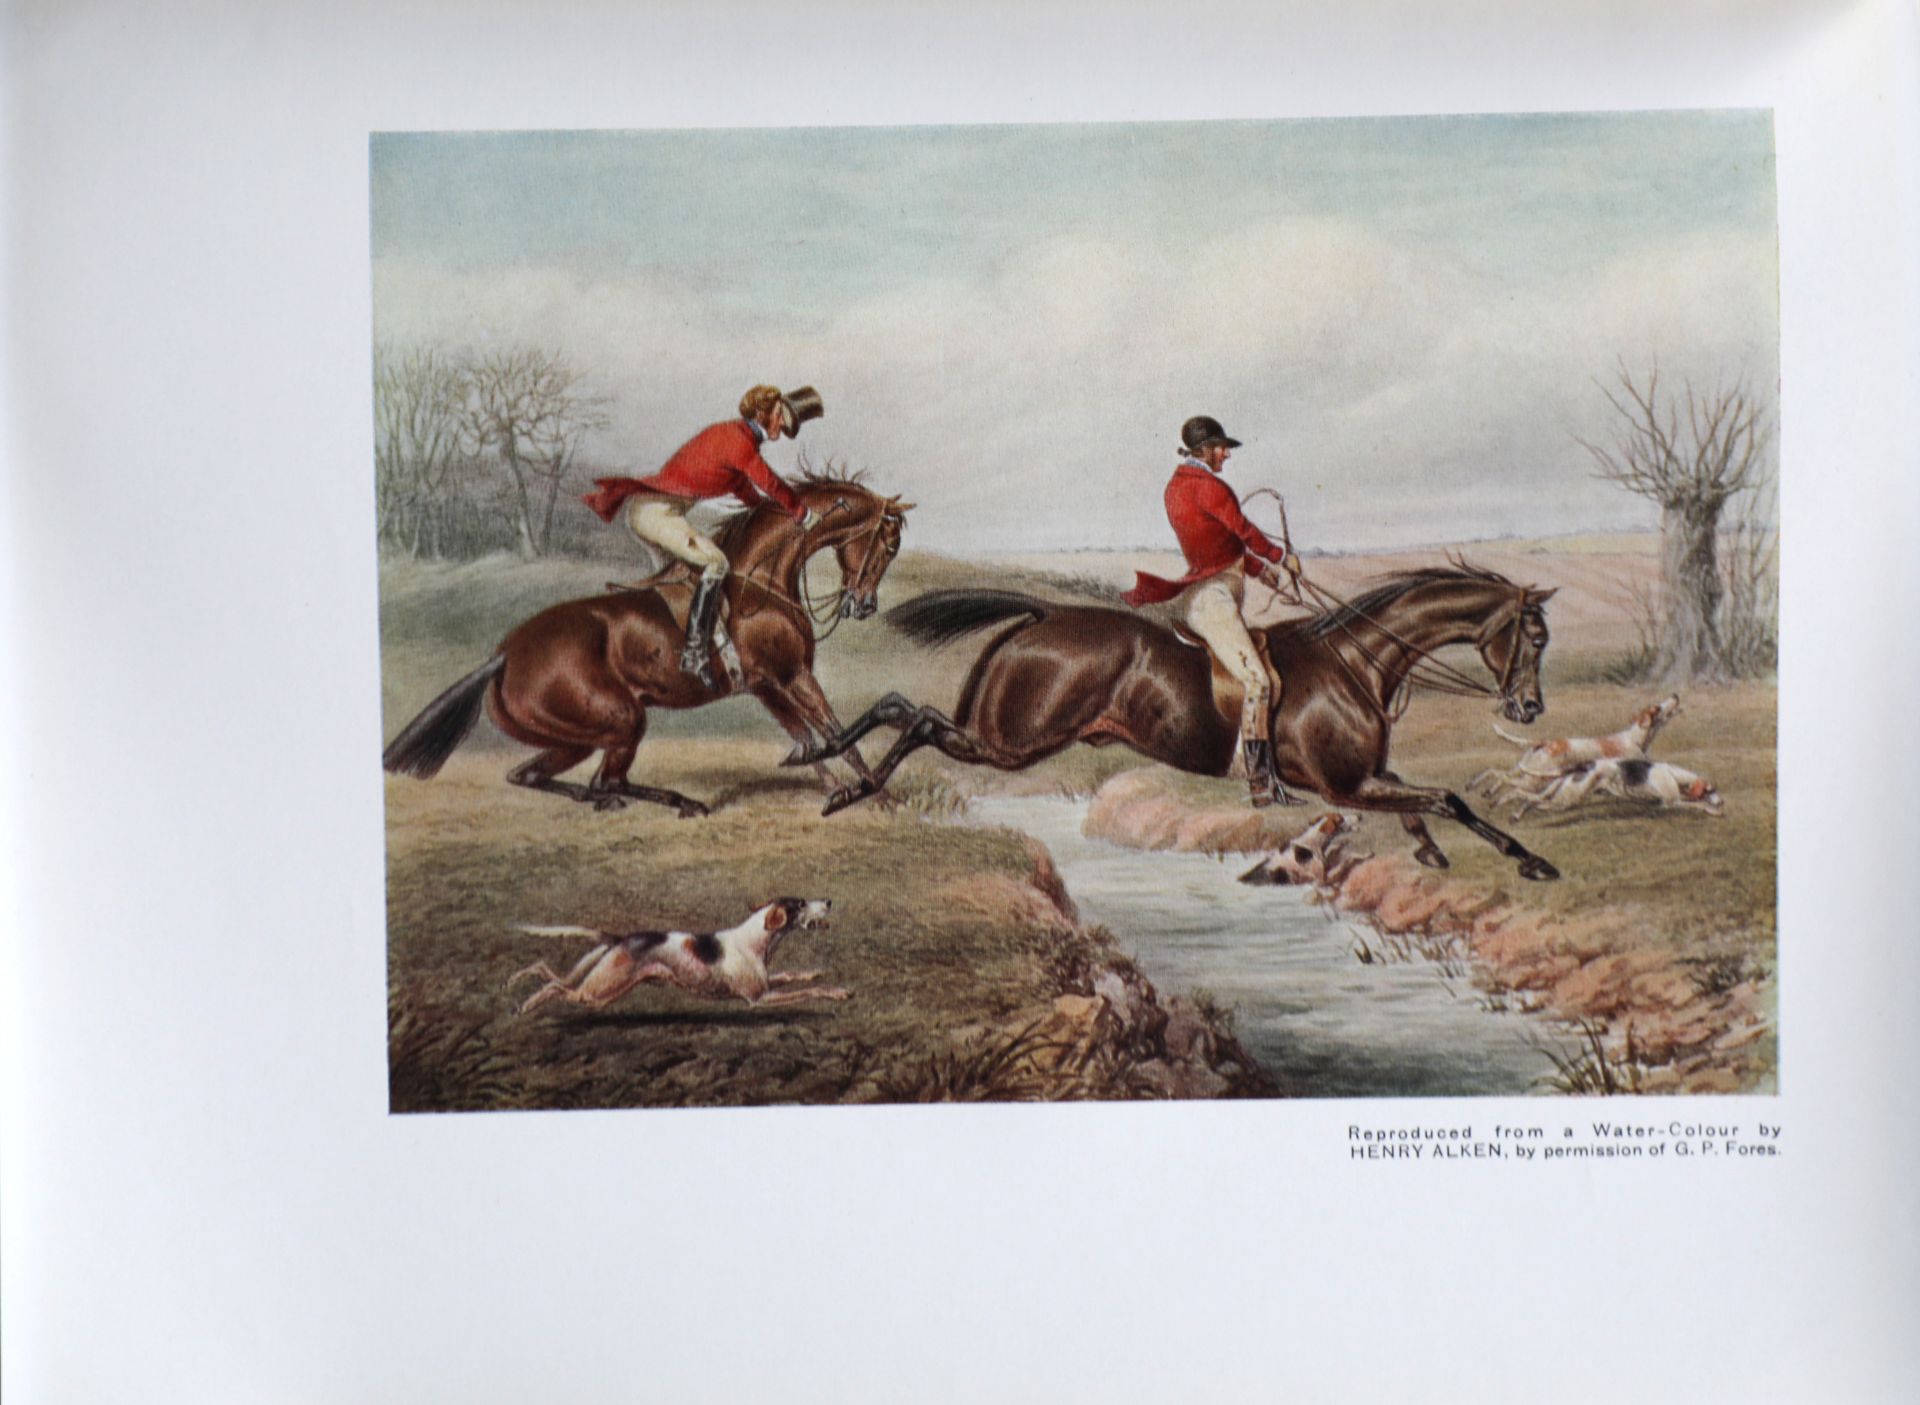 British Sporting Artists from Barlow to Herring, W Shaw Sparrow with a forward by Sir Theodore Cook, - Image 9 of 9